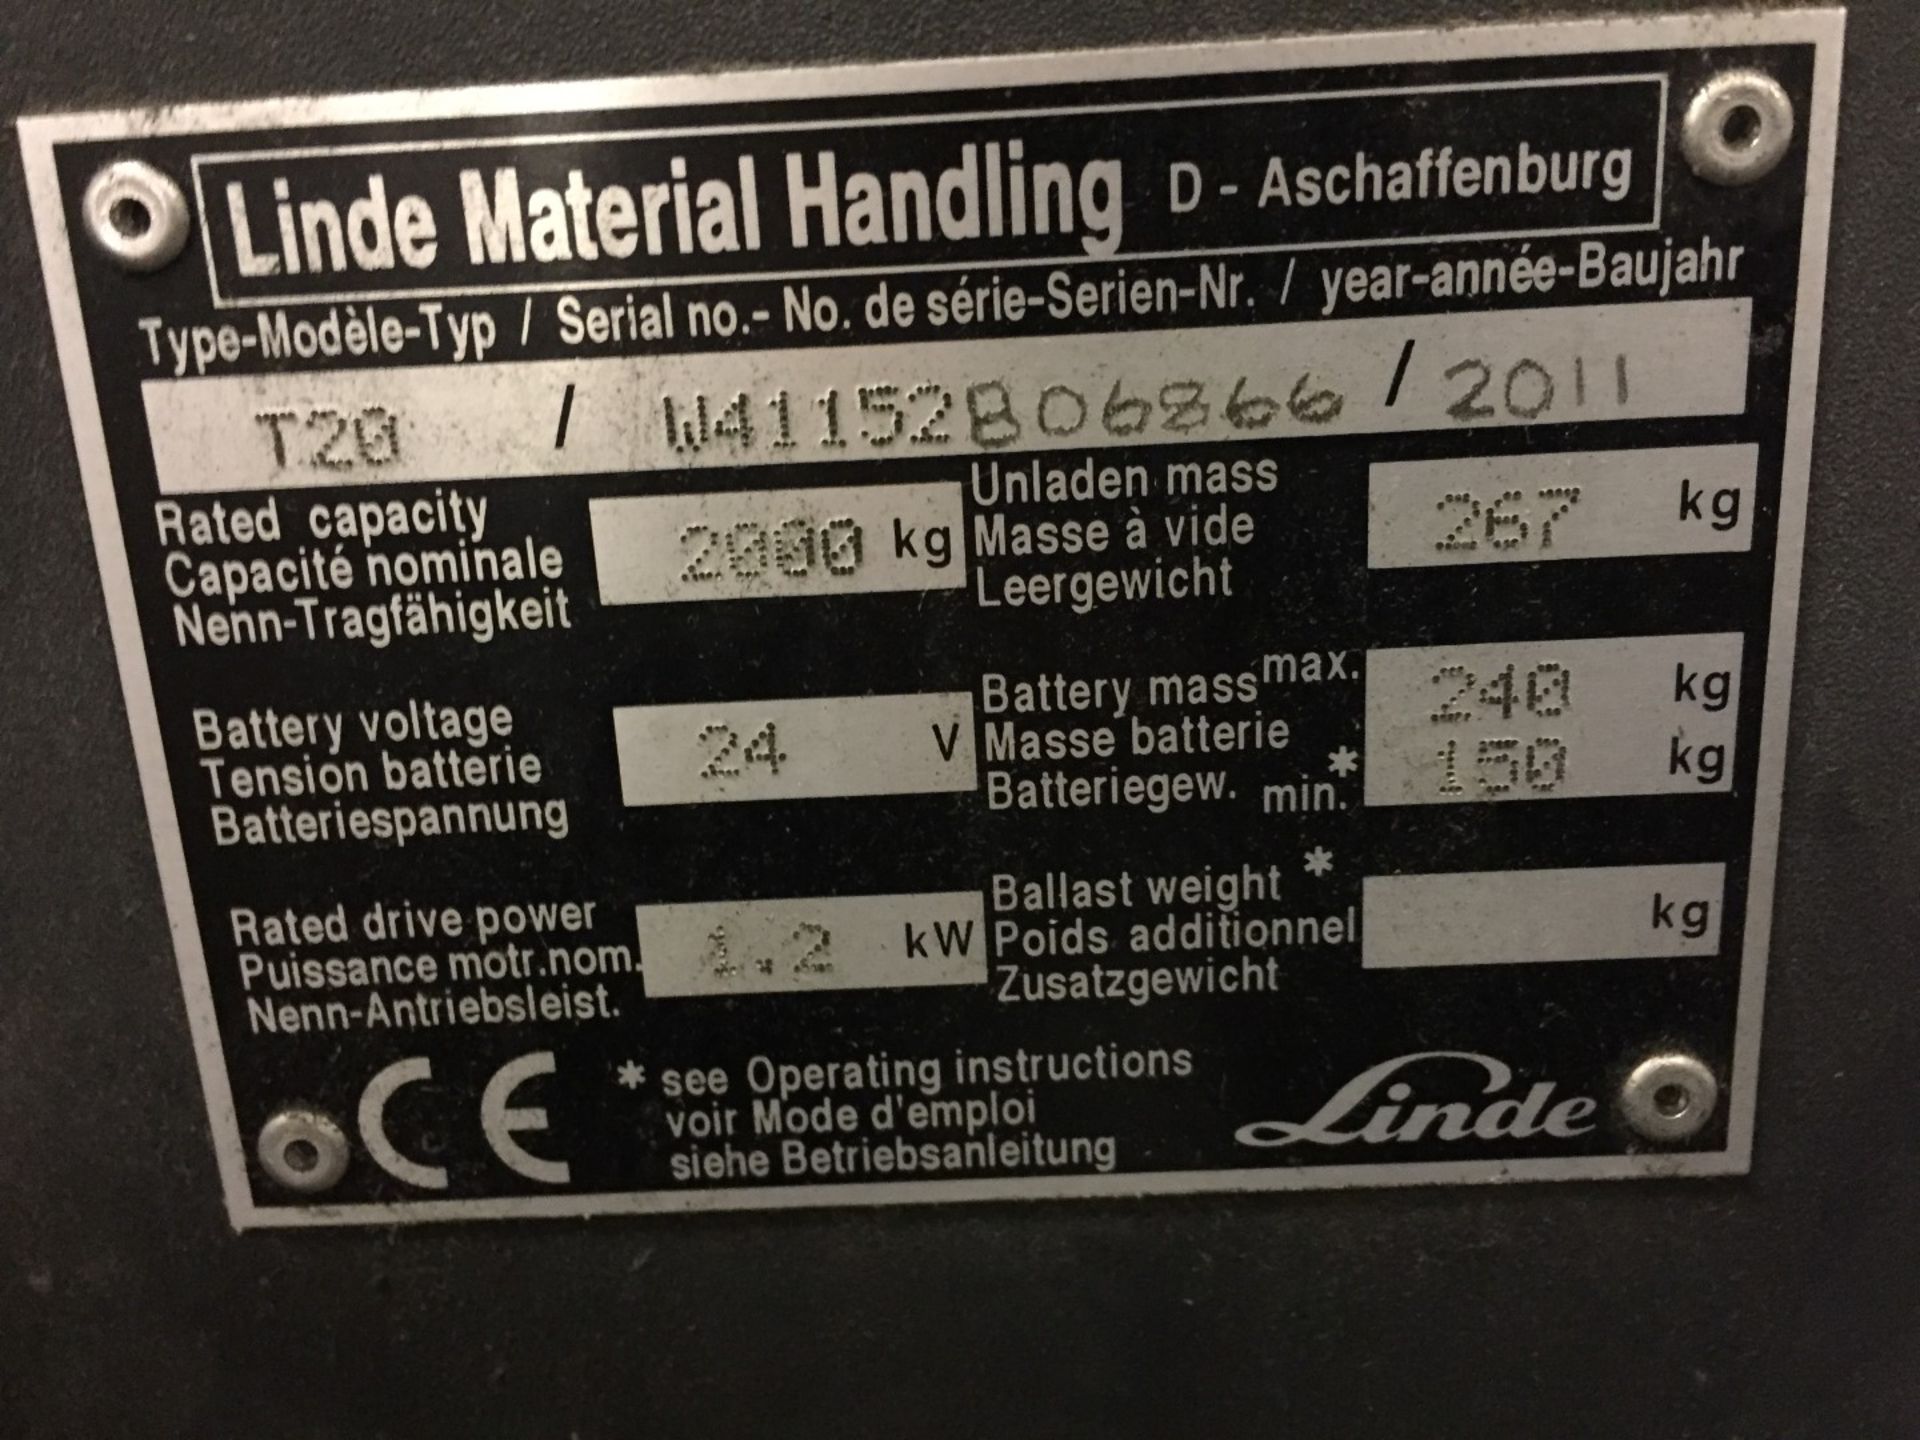 1 x Linde T20 Electric Pallet Truck - Tested and Working - Charger Included - CL007 - Ref: T20/1 - - Image 11 of 12